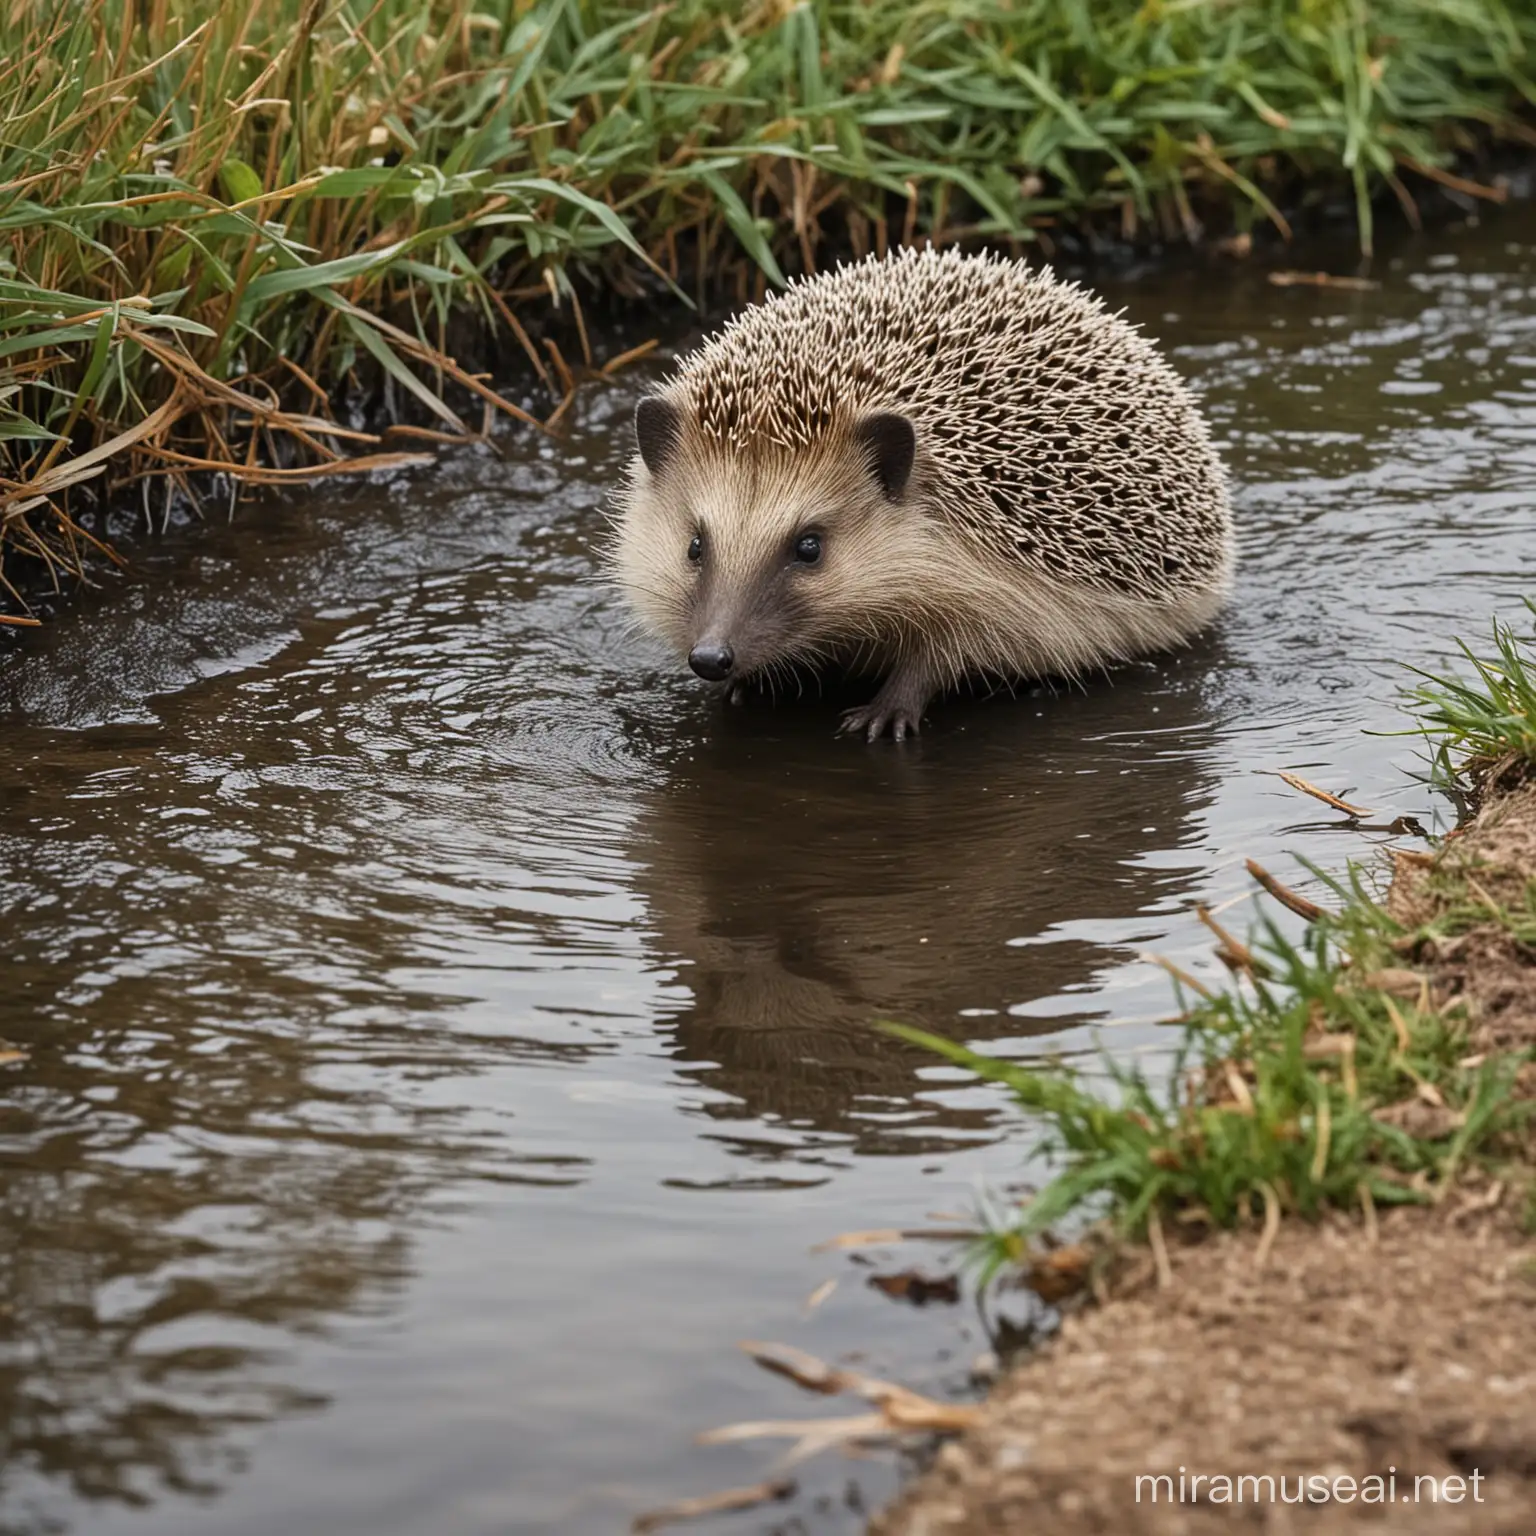 Tranquil River Scene with Hedgehog